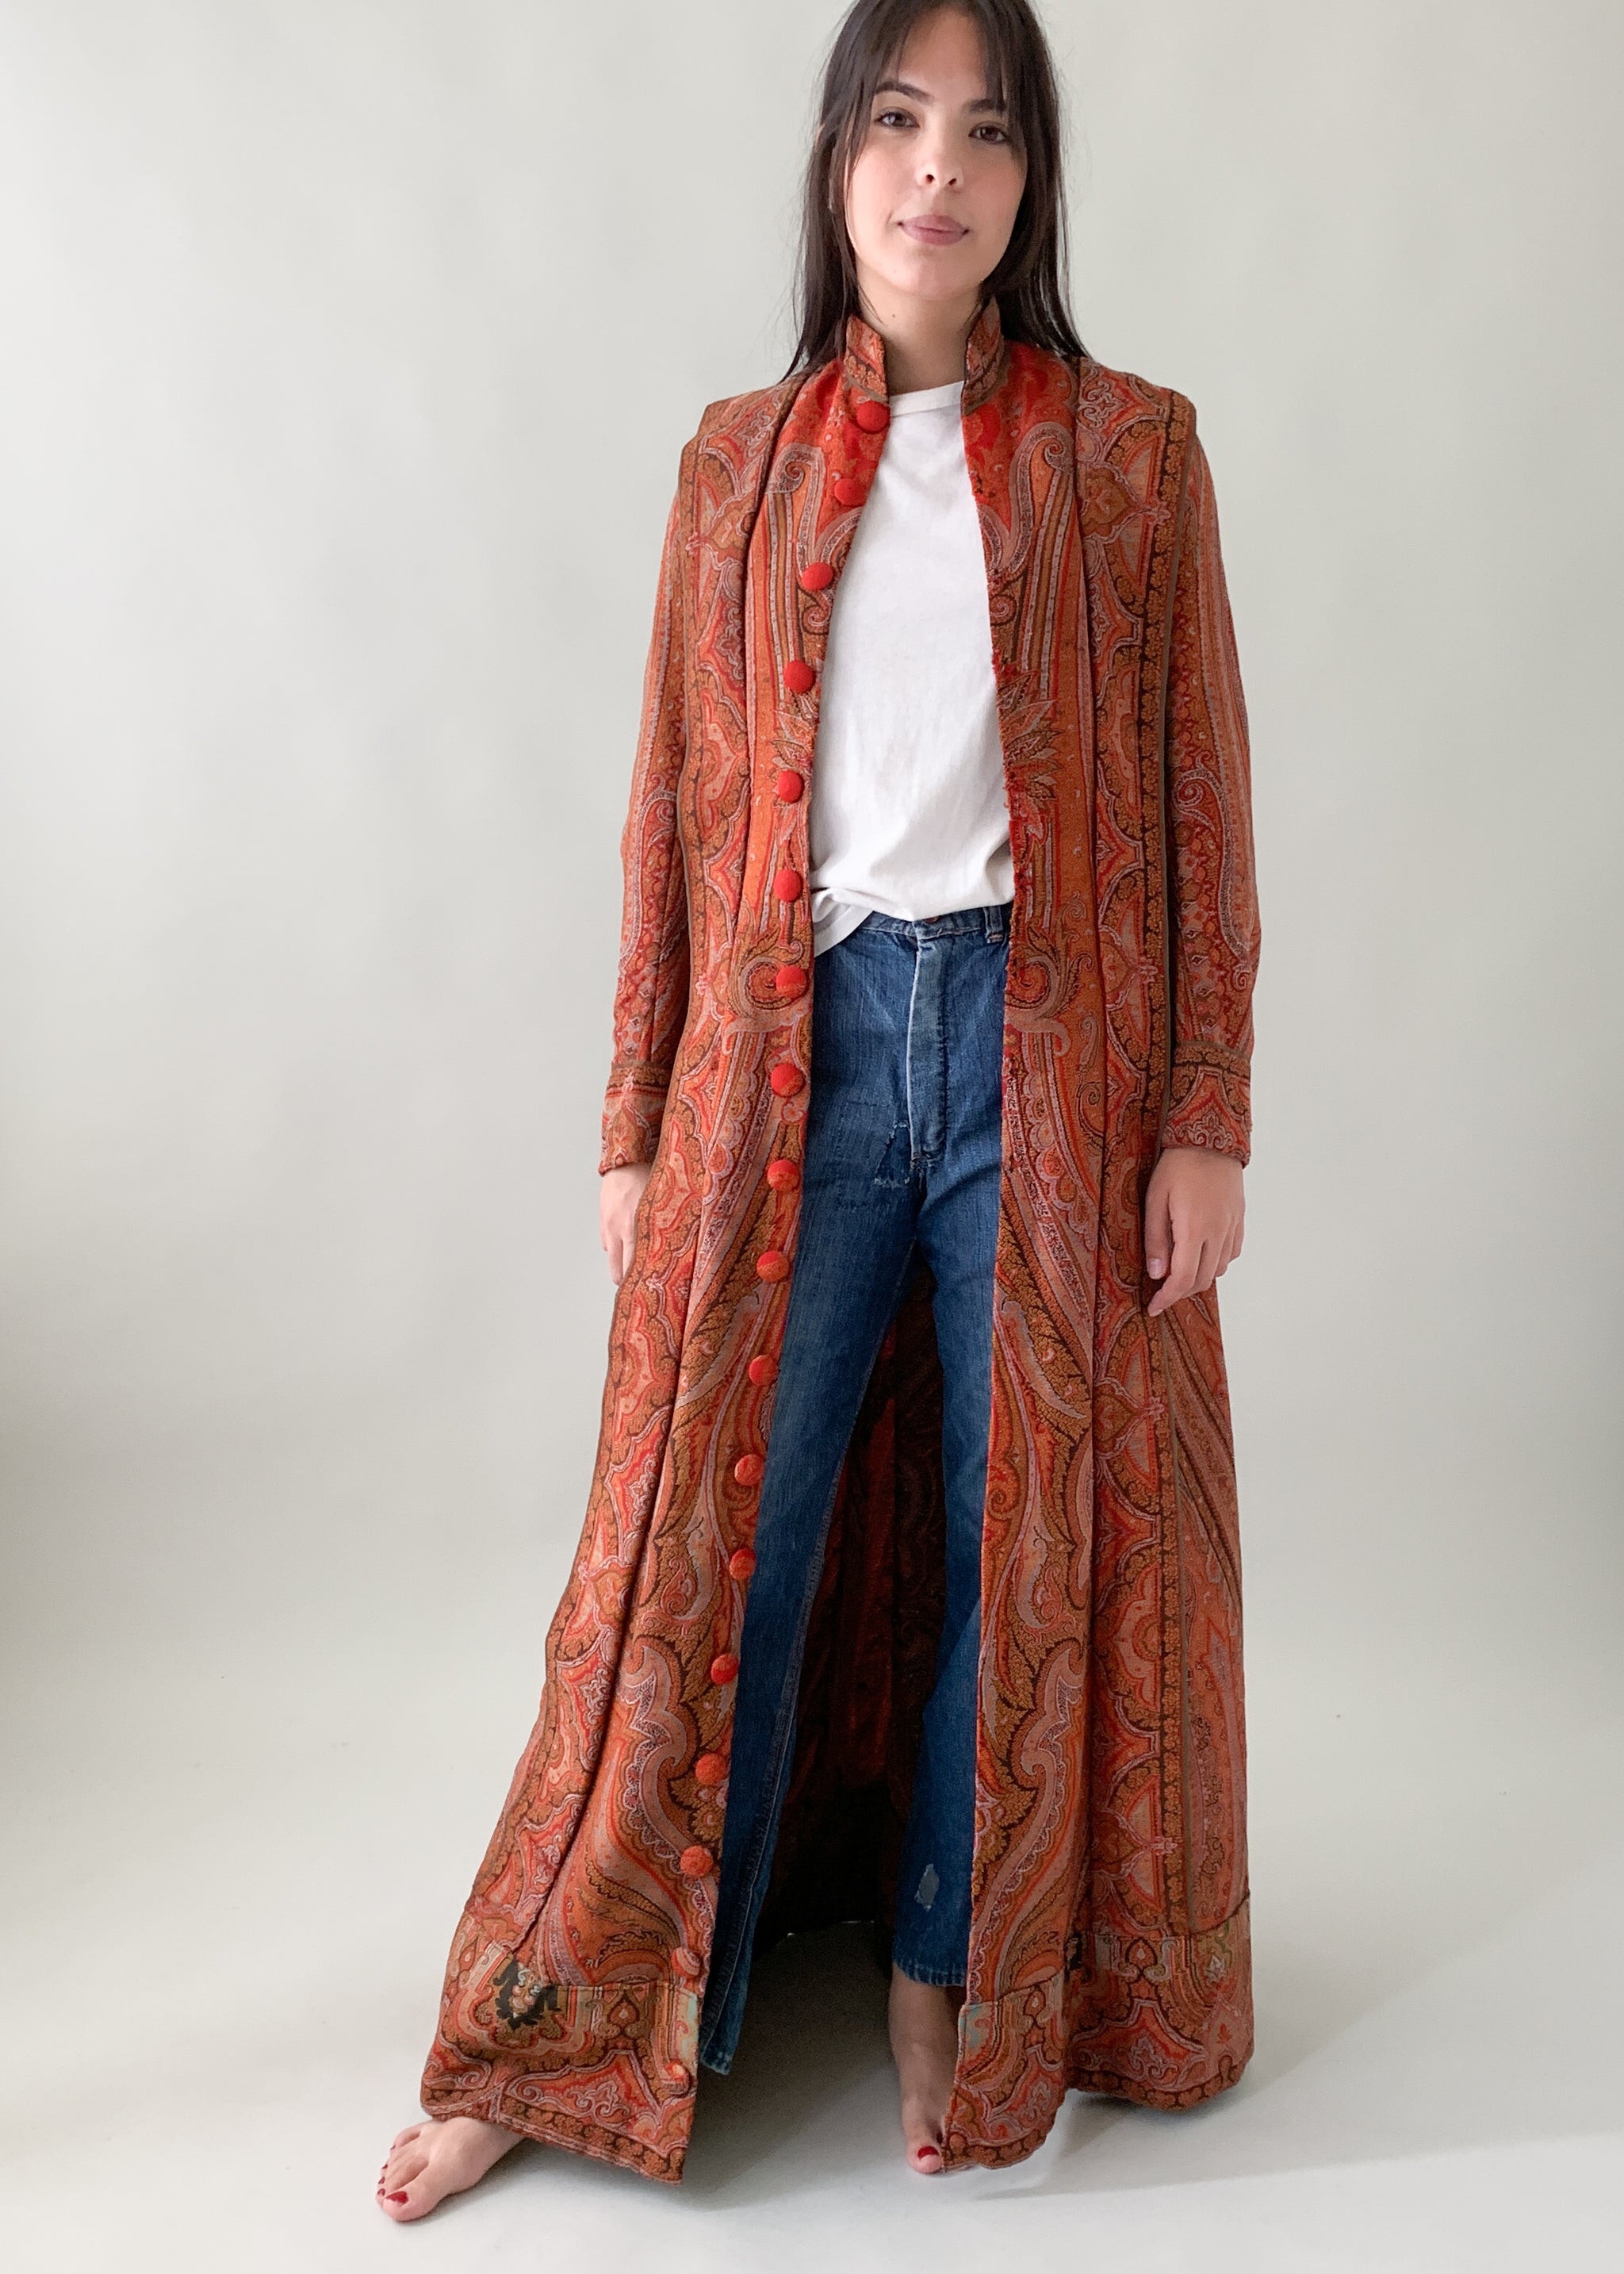 Antique Victorian Paisley Duster Coat - Raleigh Vintage